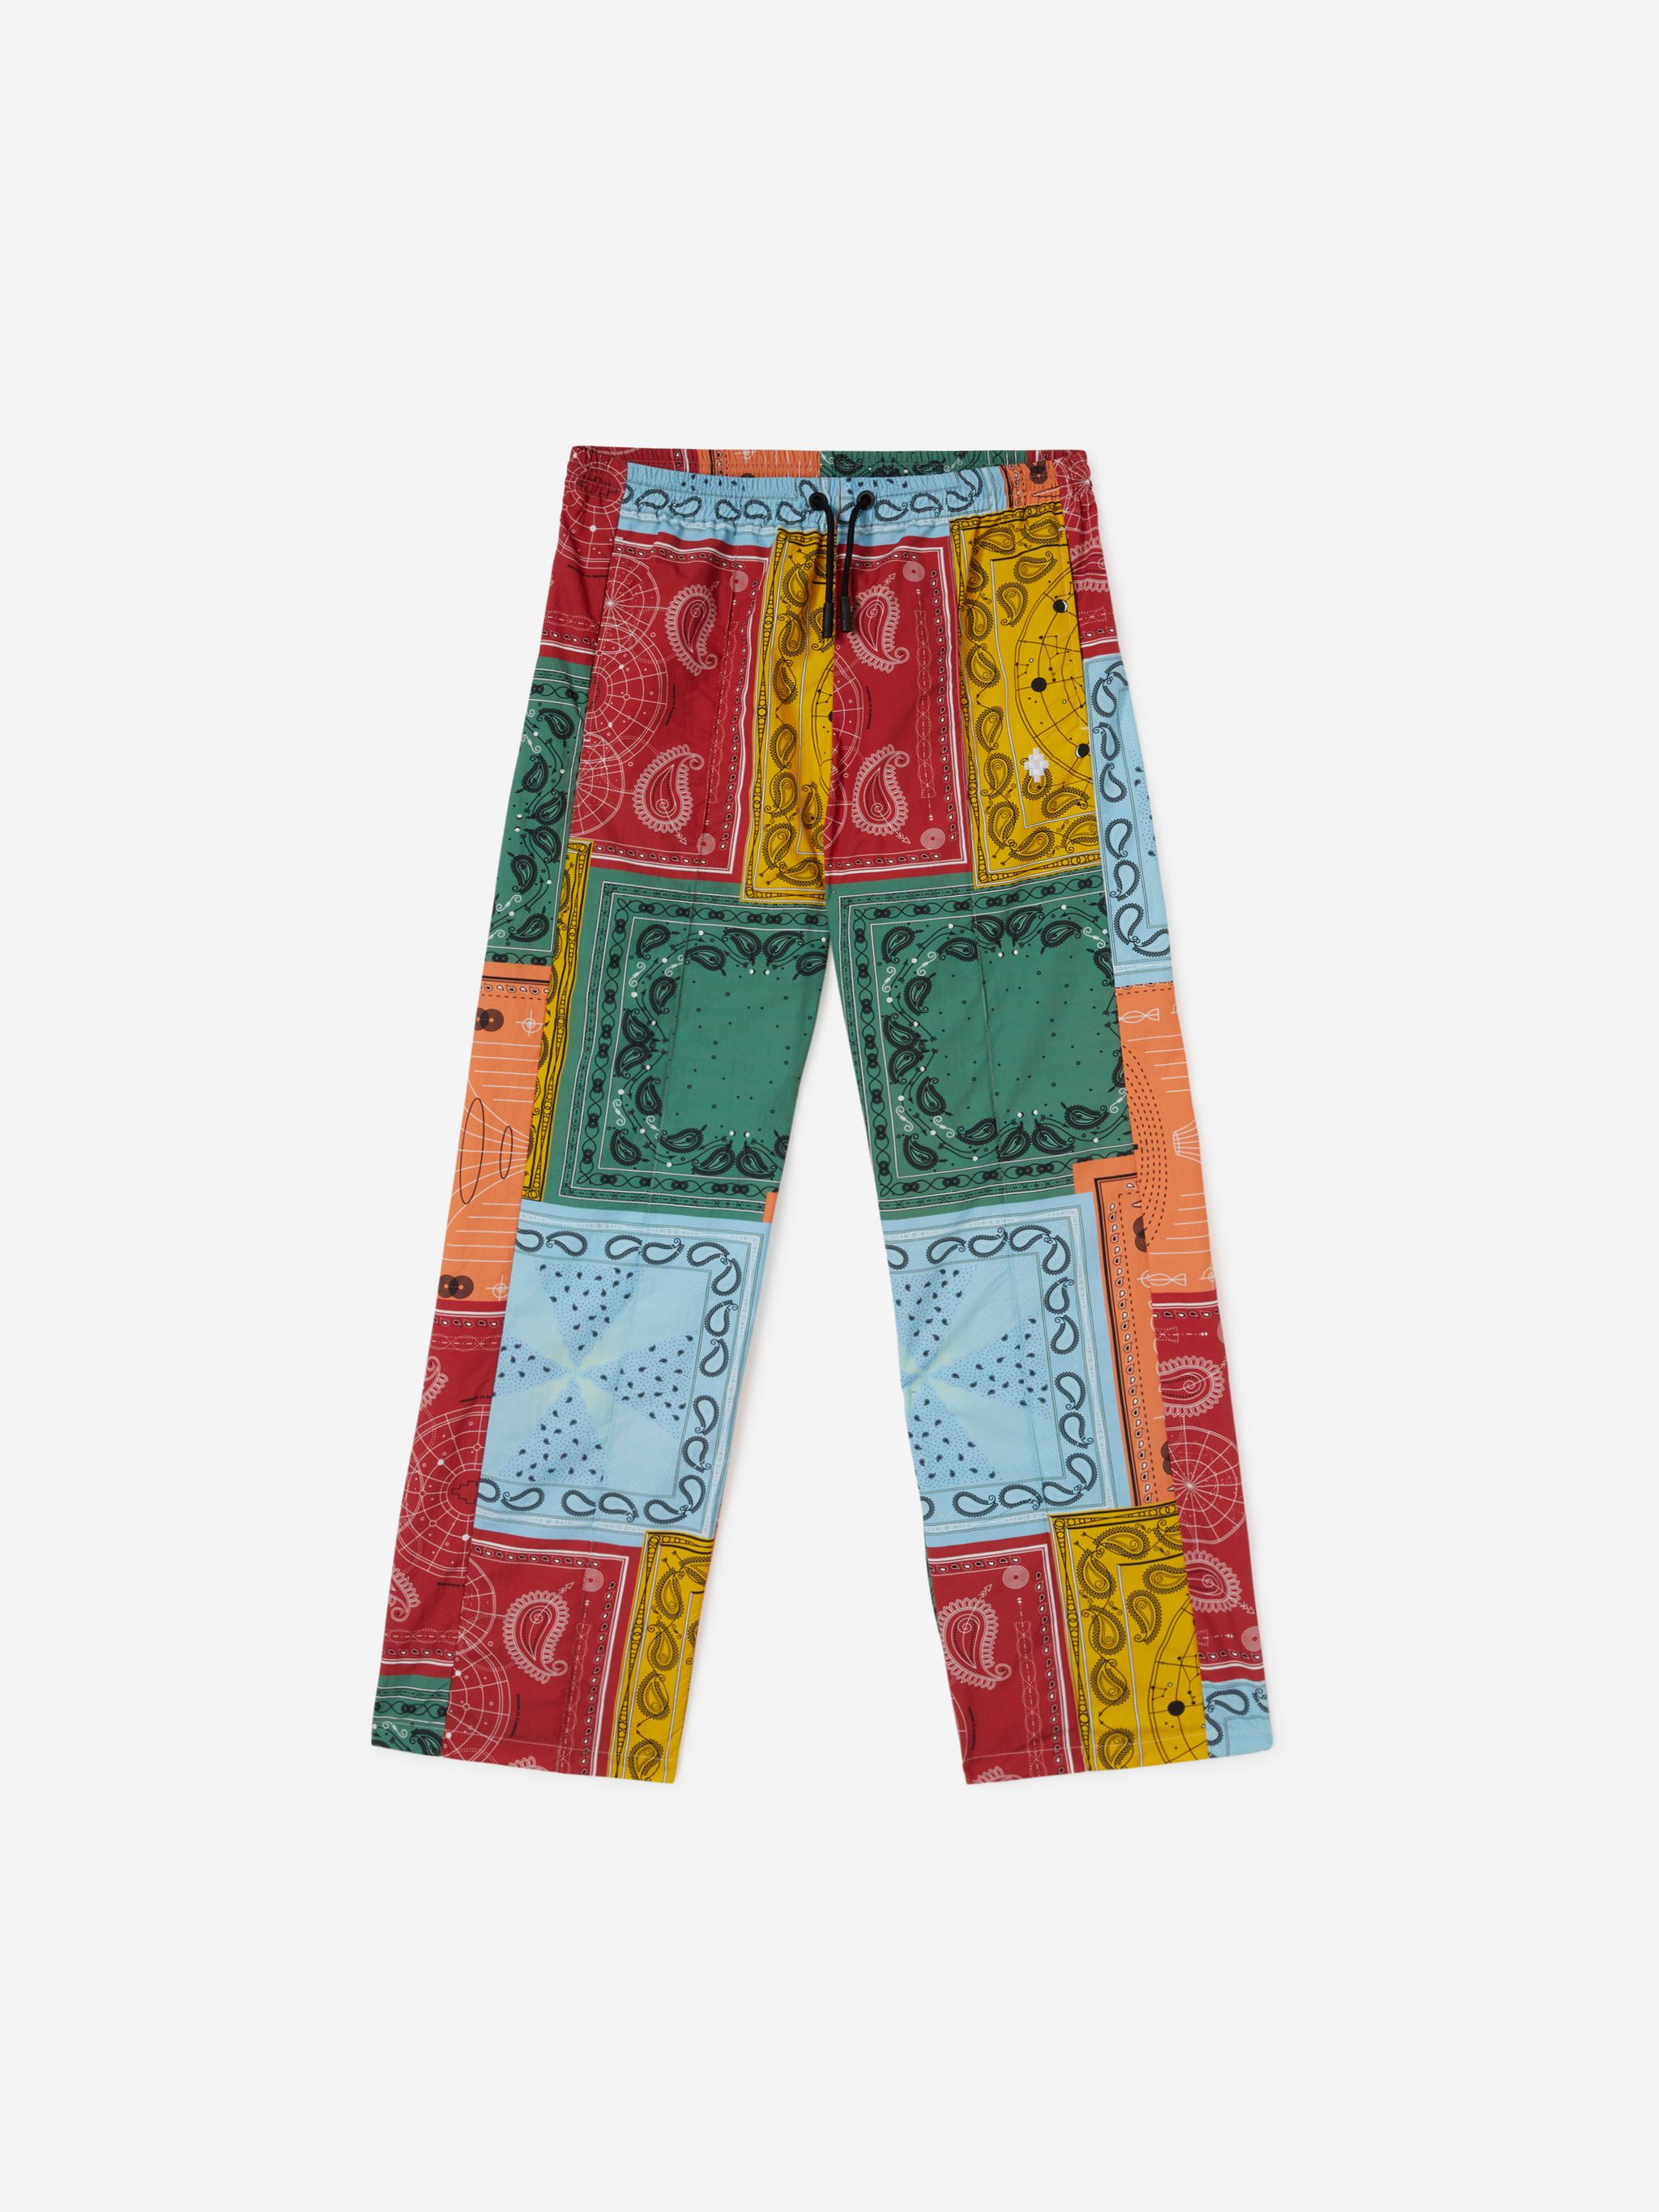 Multicolour cotton bandana-print straight-leg trousers from Marcelo Burlon County of Milan featuring patchwork design, bandana print, straight leg, elasticated waistband and ankle-length.